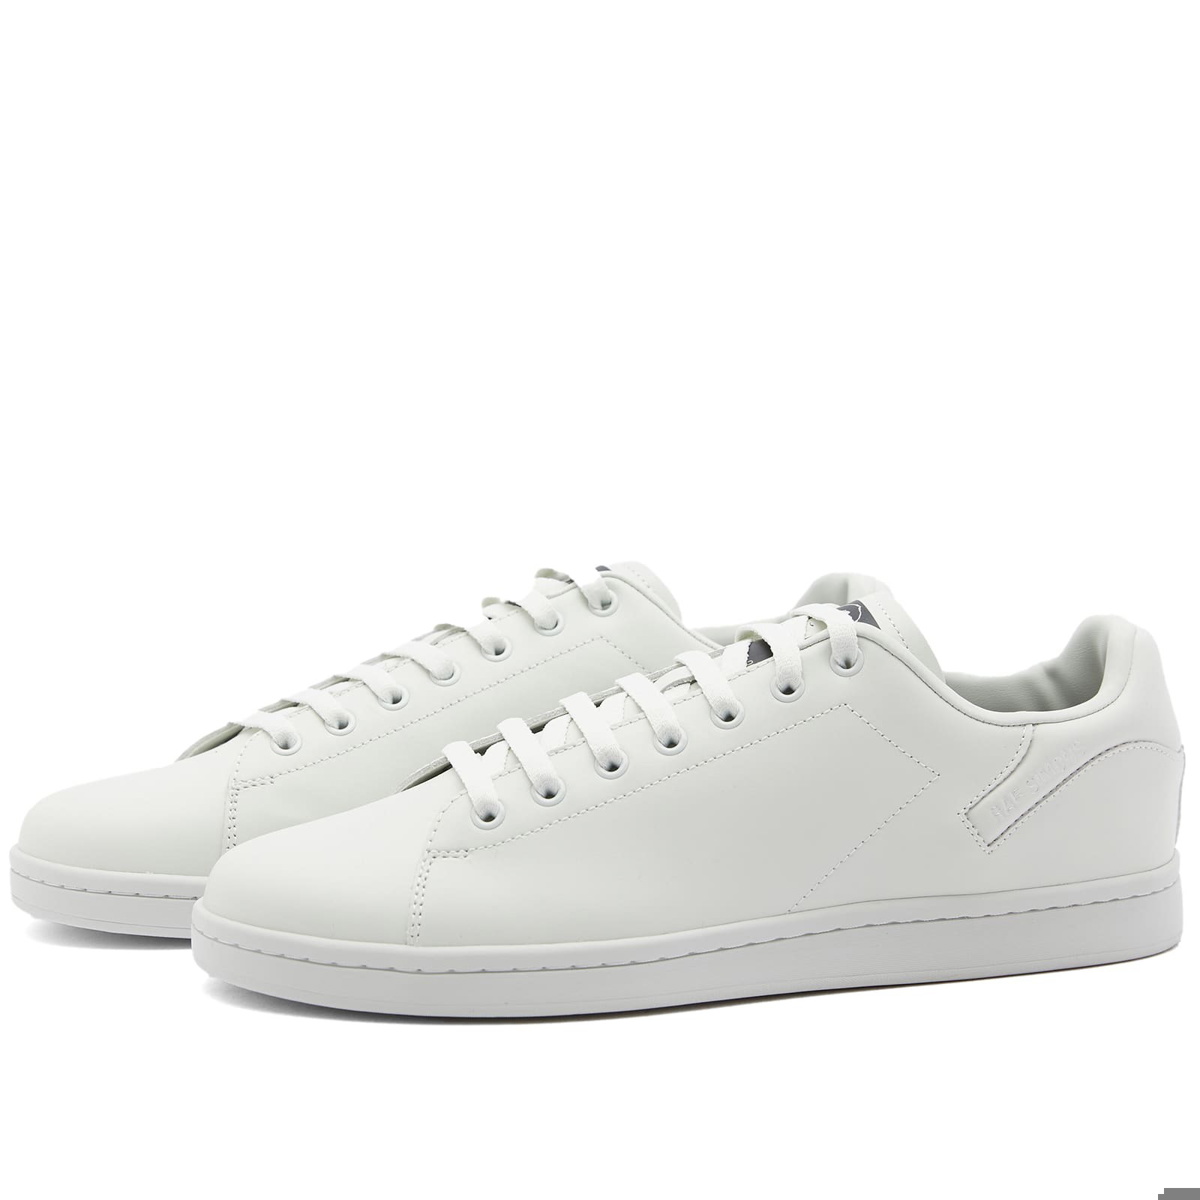 Raf Simons Men's Orion Cupsole Leather Cupsole Sneakers in Light Grey ...